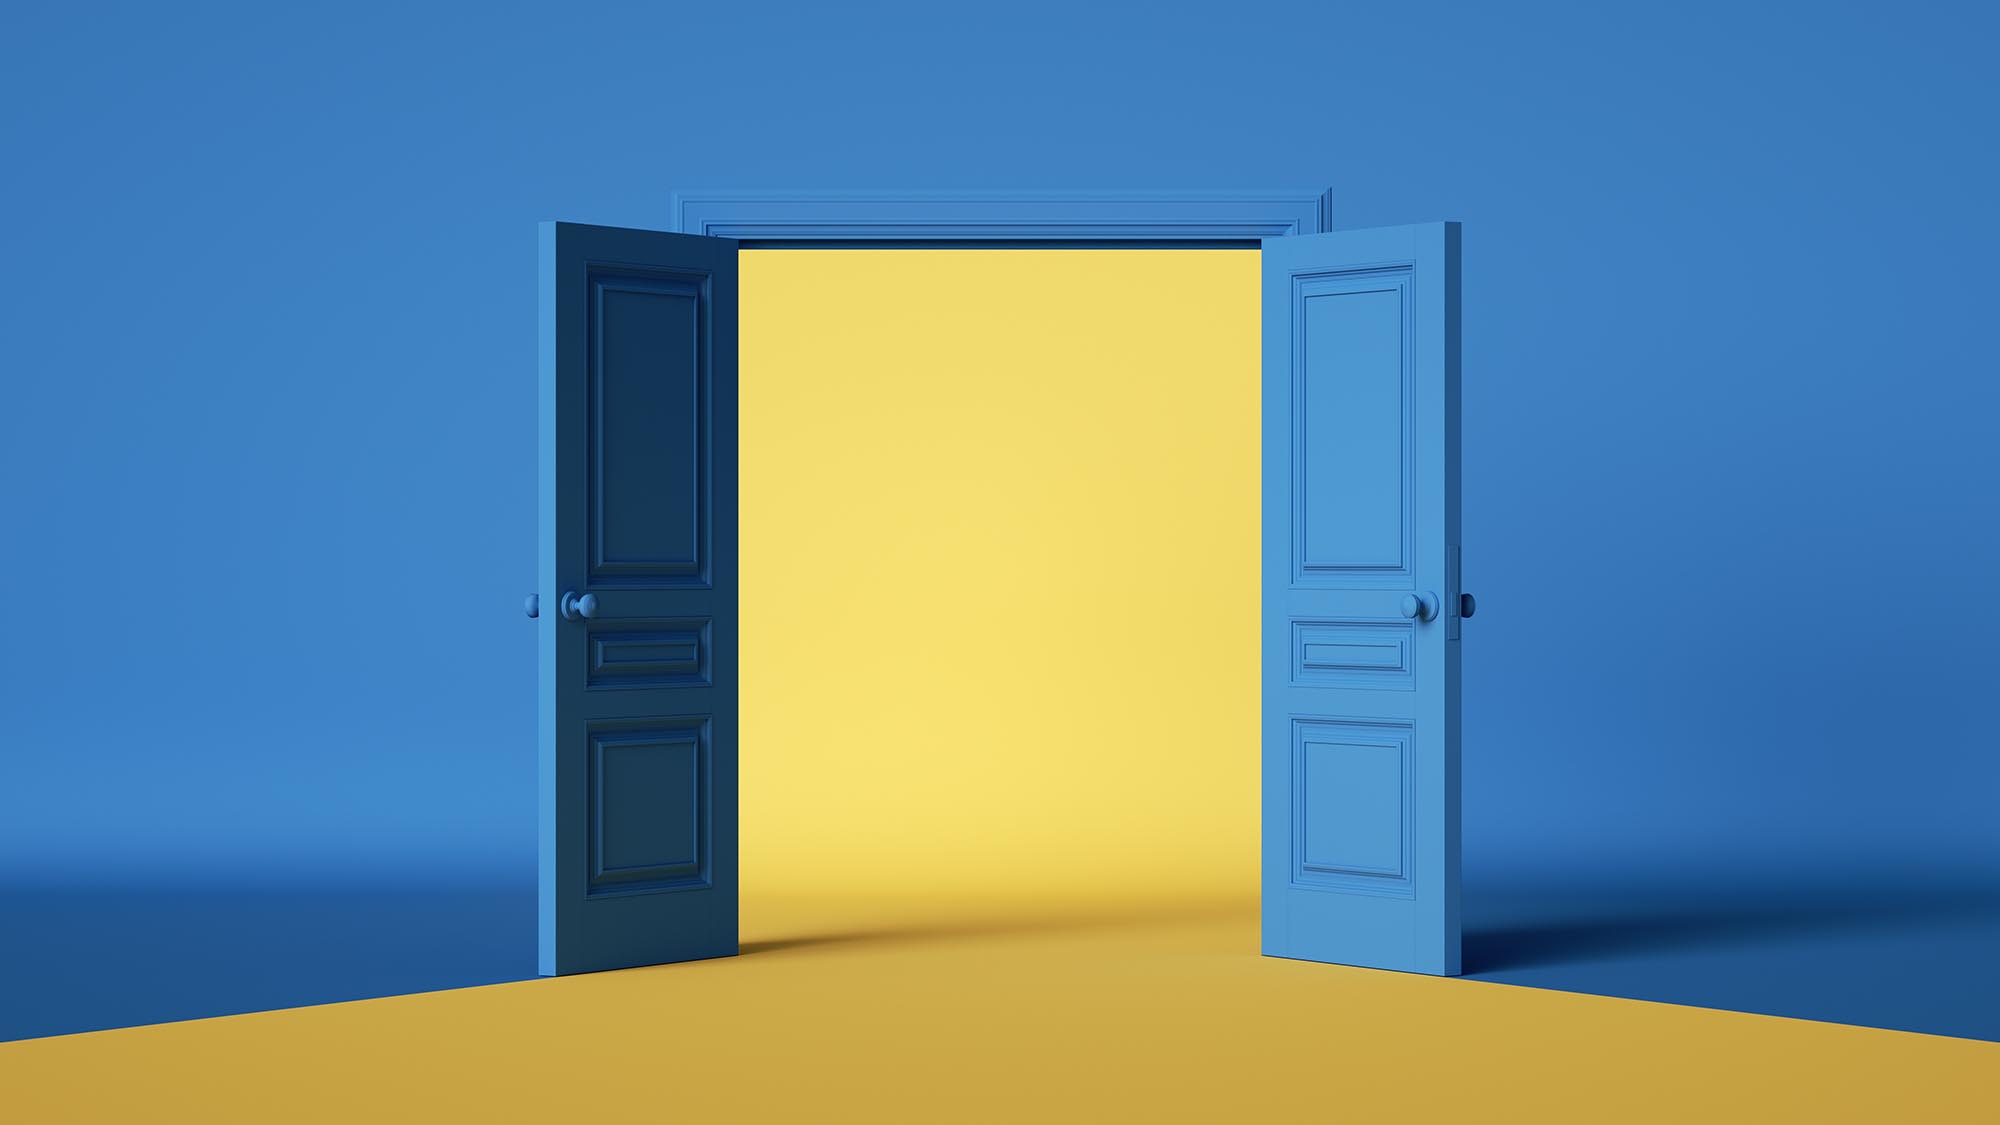 blue yellow background with double doors opening. Architectural design element. Modern minimal concept.